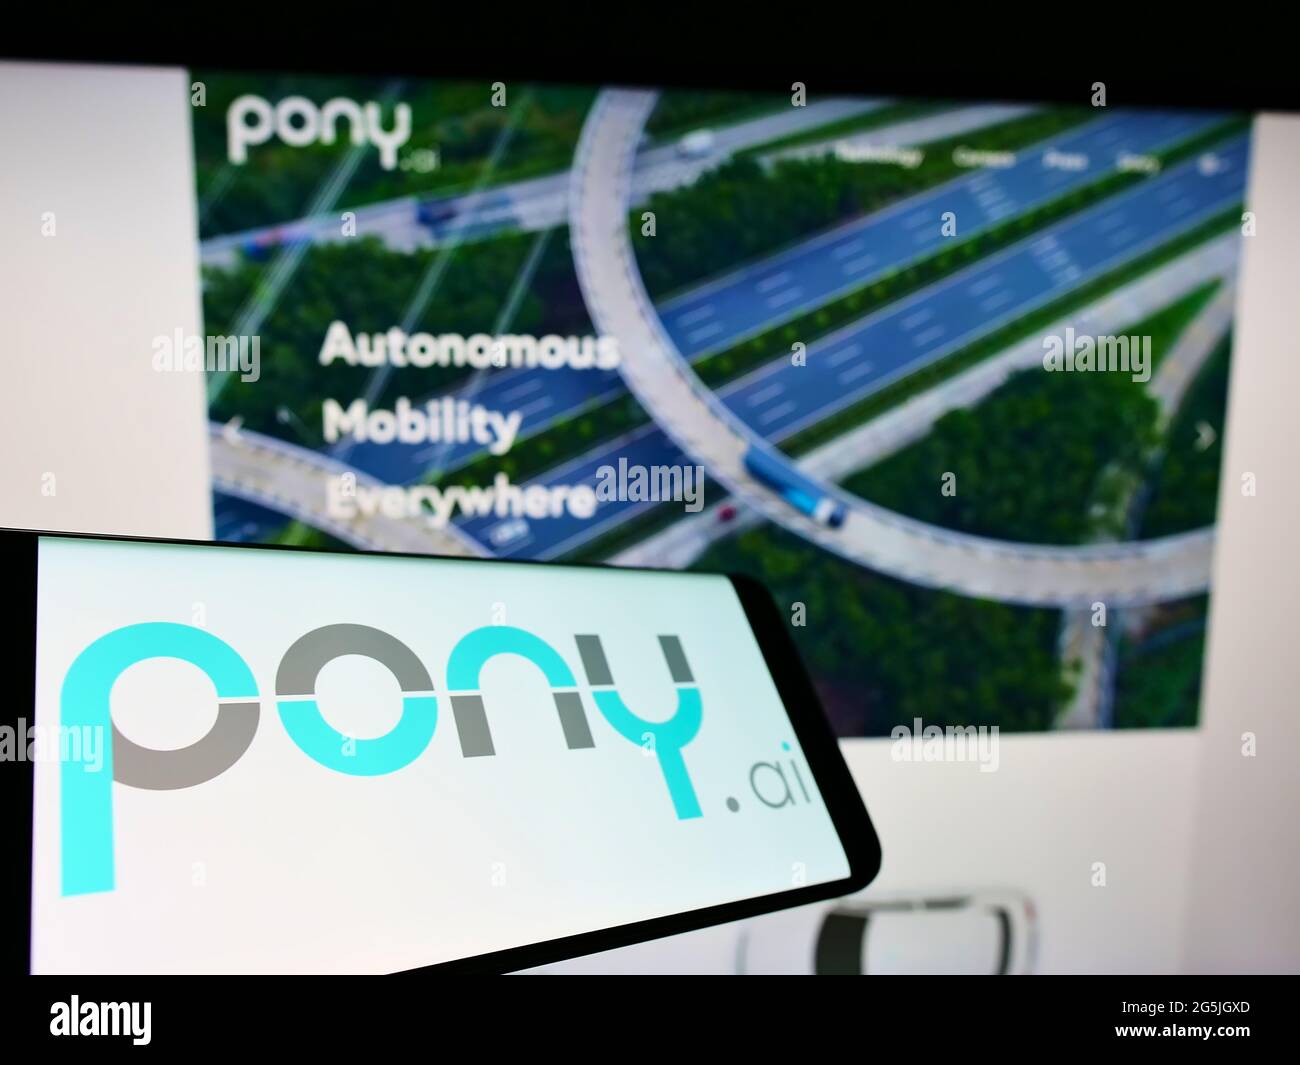 Cellphone with logo of autonomous vehicle company Pony.AI Inc. on screen in front of business website. Focus on center-left of phone display. Stock Photo